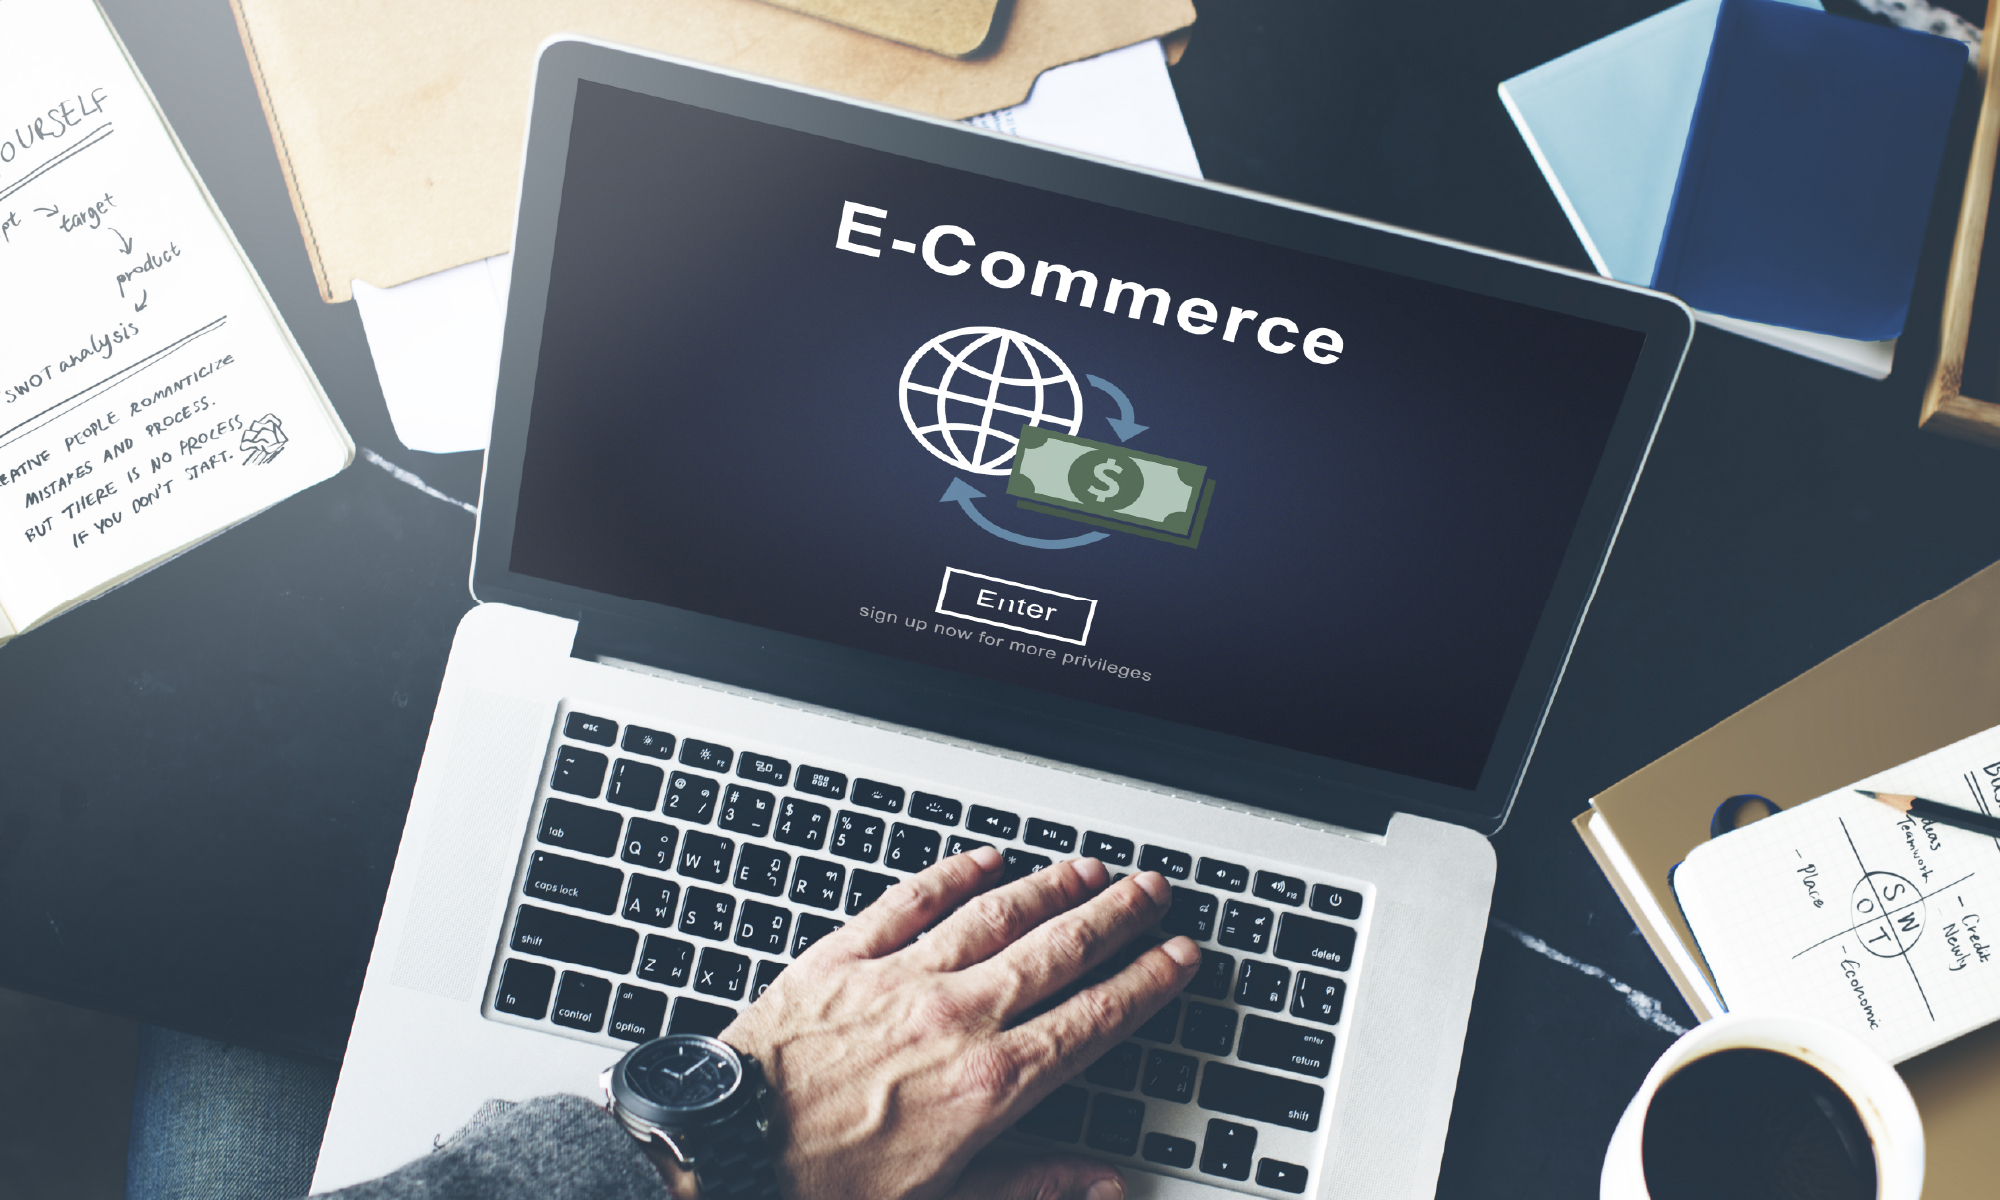 How can B2B companies leverage e-commerce capabilities?